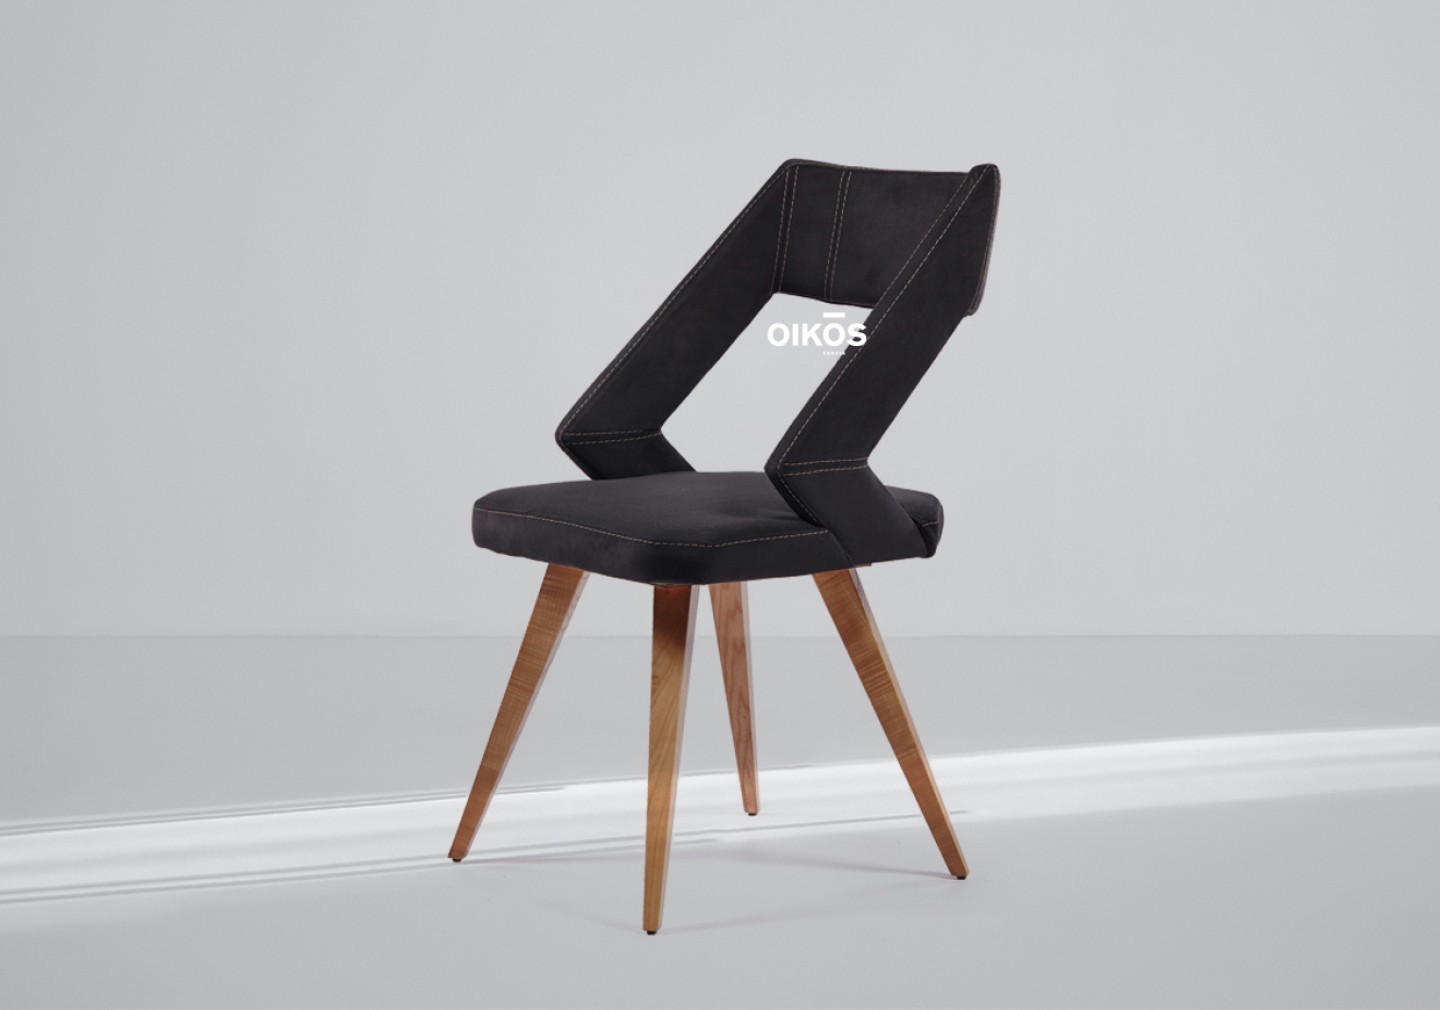 THE NEW BOSTON DINING CHAIR